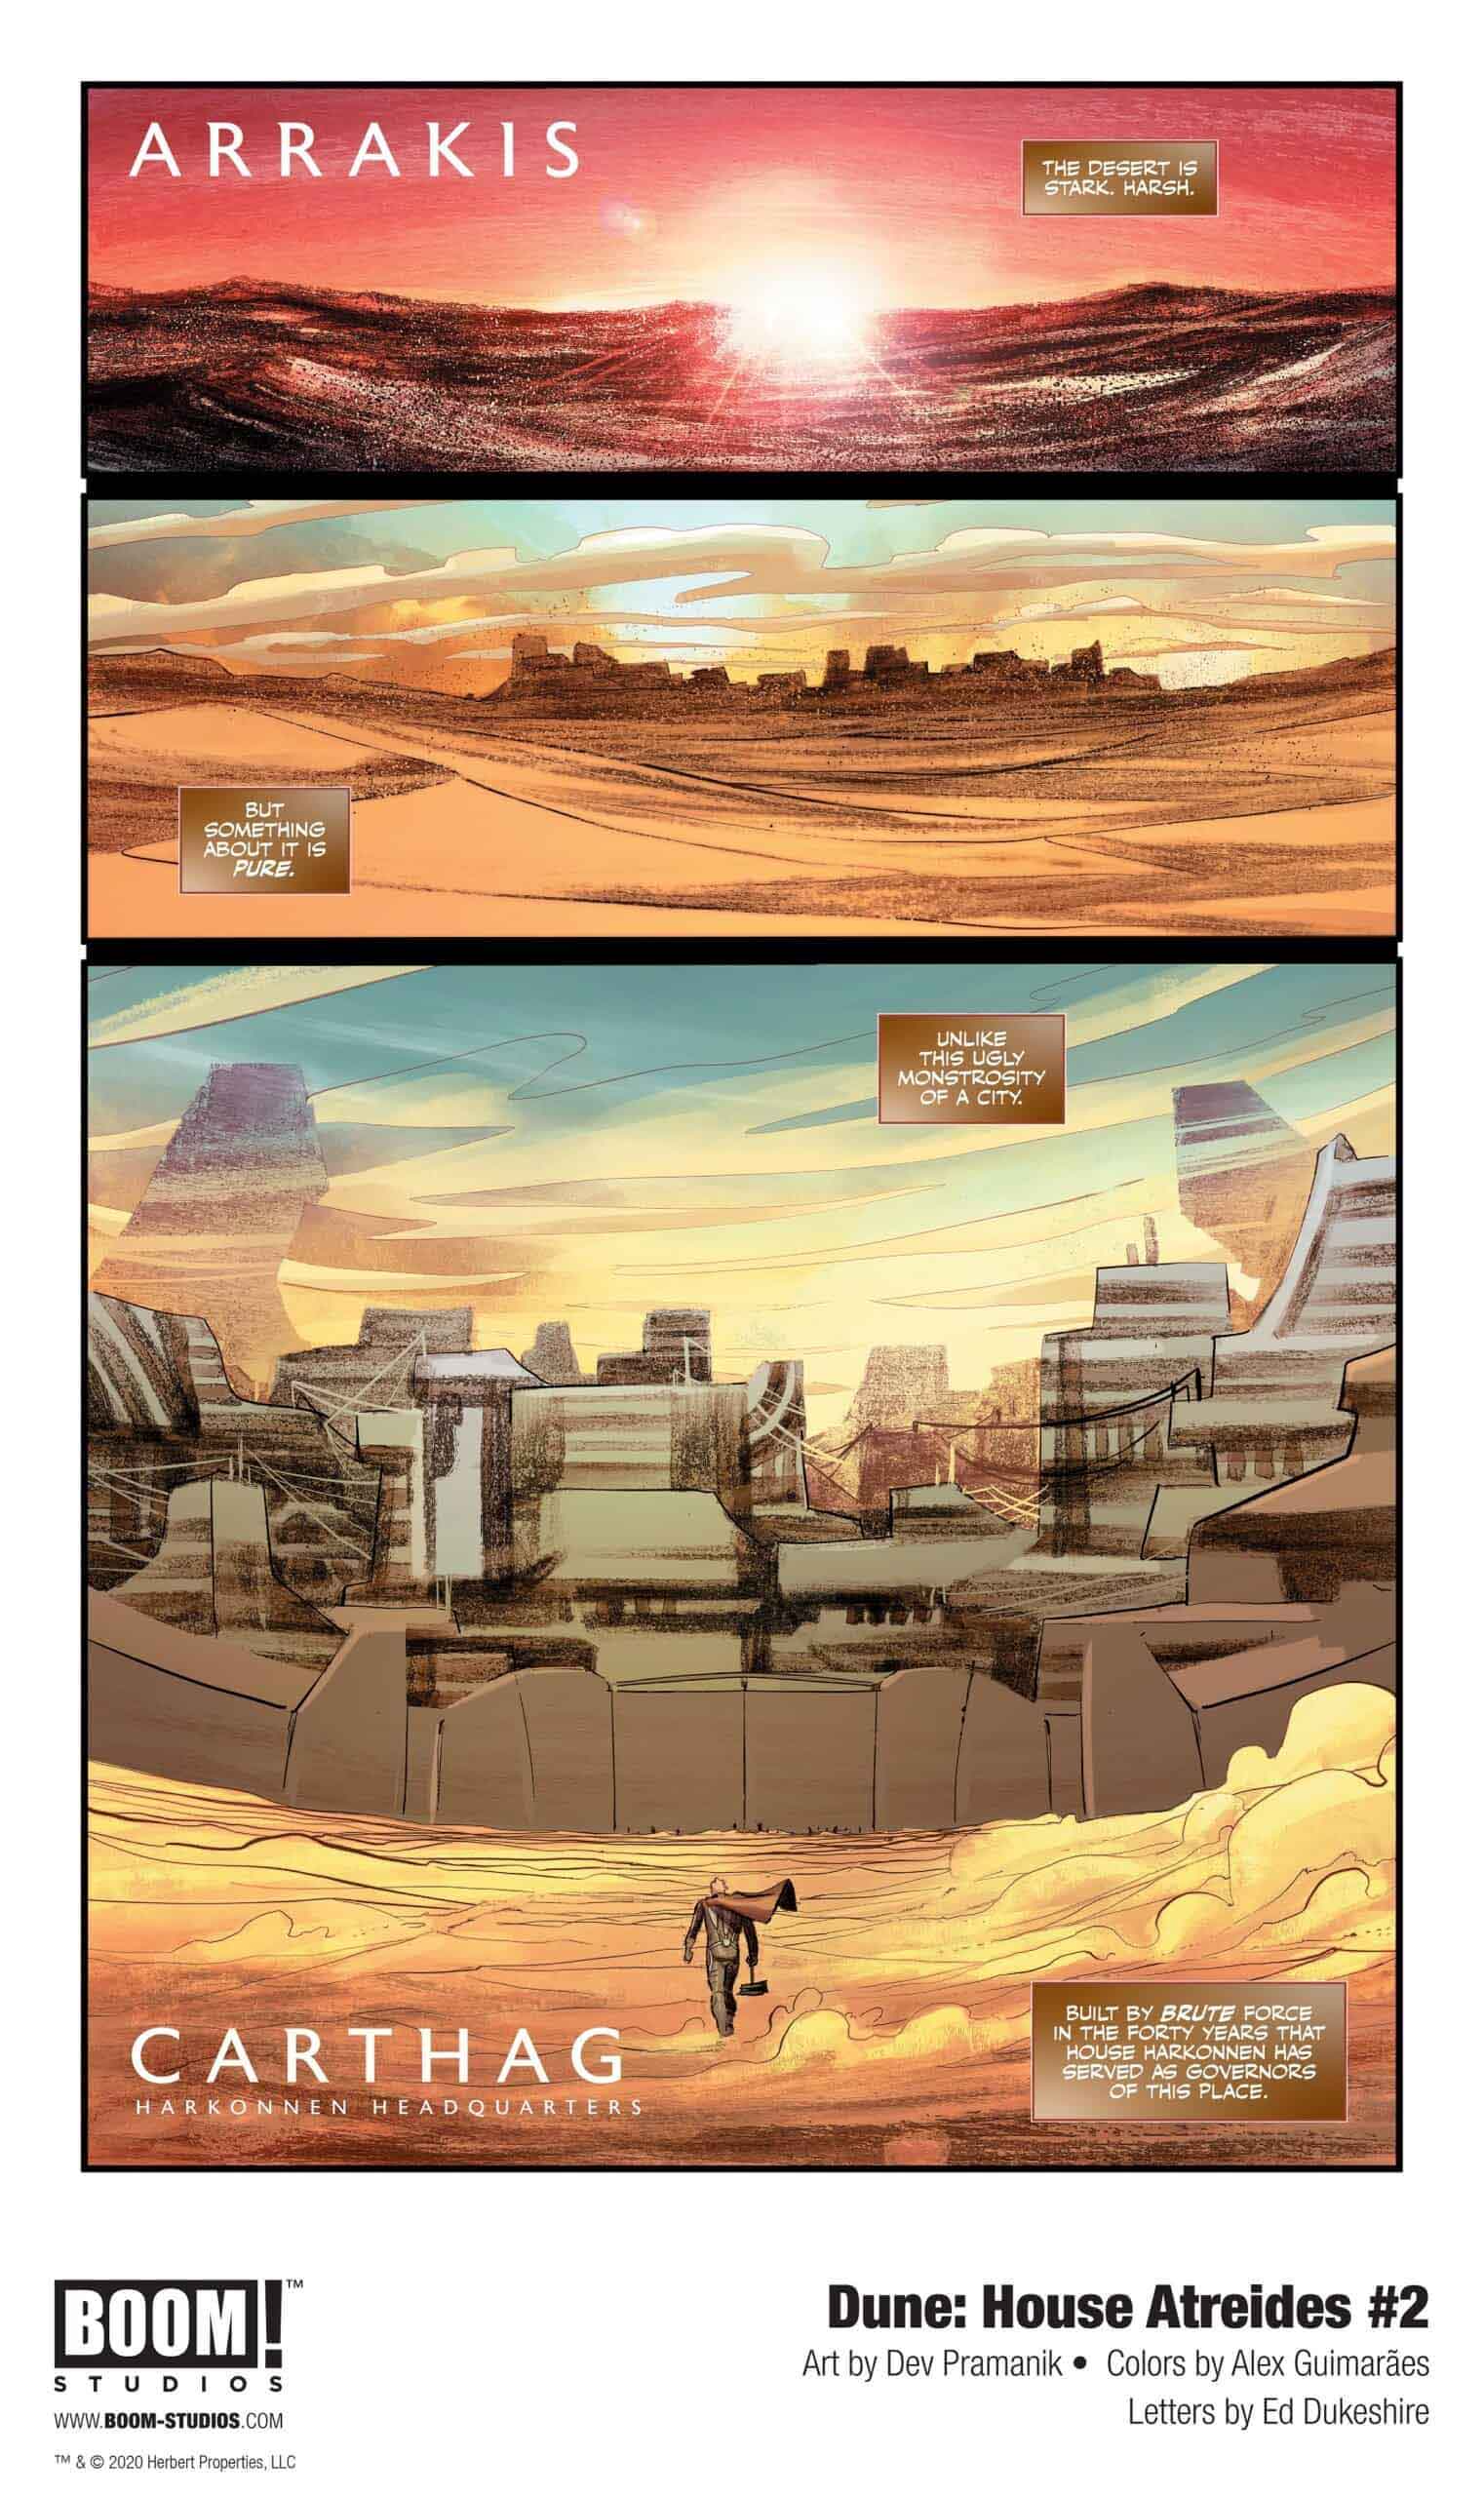 Dune: House Atreides comic series. Issue #2, preview page 1.